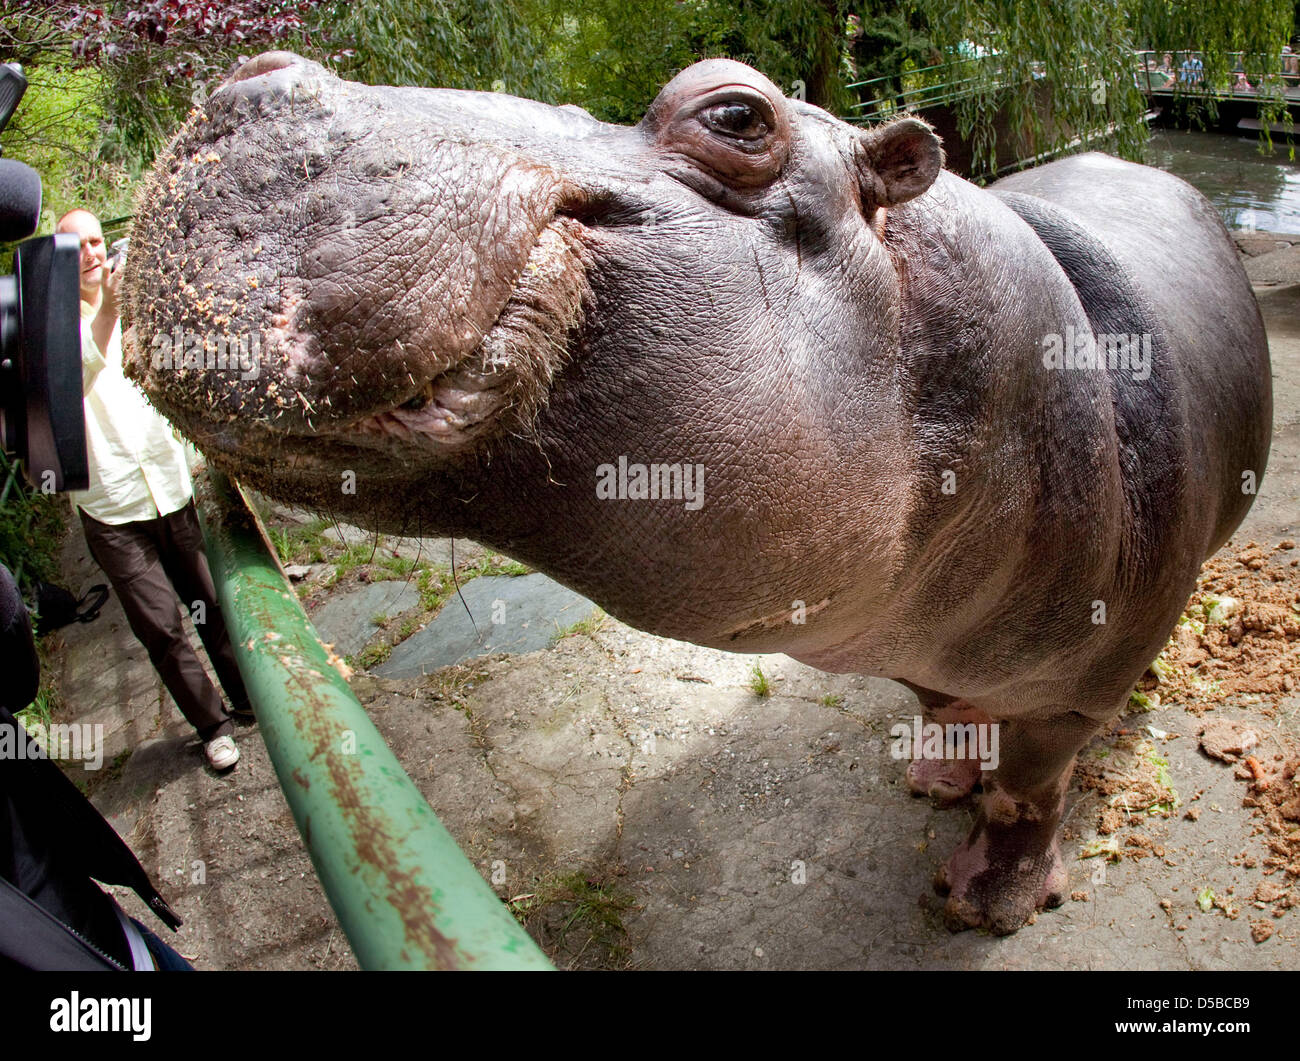 Hippopotamus-lady Tana seems to smile in her enclosure on her 50th birthday at the Opel-Zoo in Kronberg, Germany, 25 August 2010. She is the oldest animal of the zoo and one of the oldest hippopotamus in Europe. The heavy jubilarian was born 1960 in Leipzig. She has lived in an enclosure with water of the Opel-Zoo for the last 40 years. Photo: Frank Rumpenhorst Stock Photo